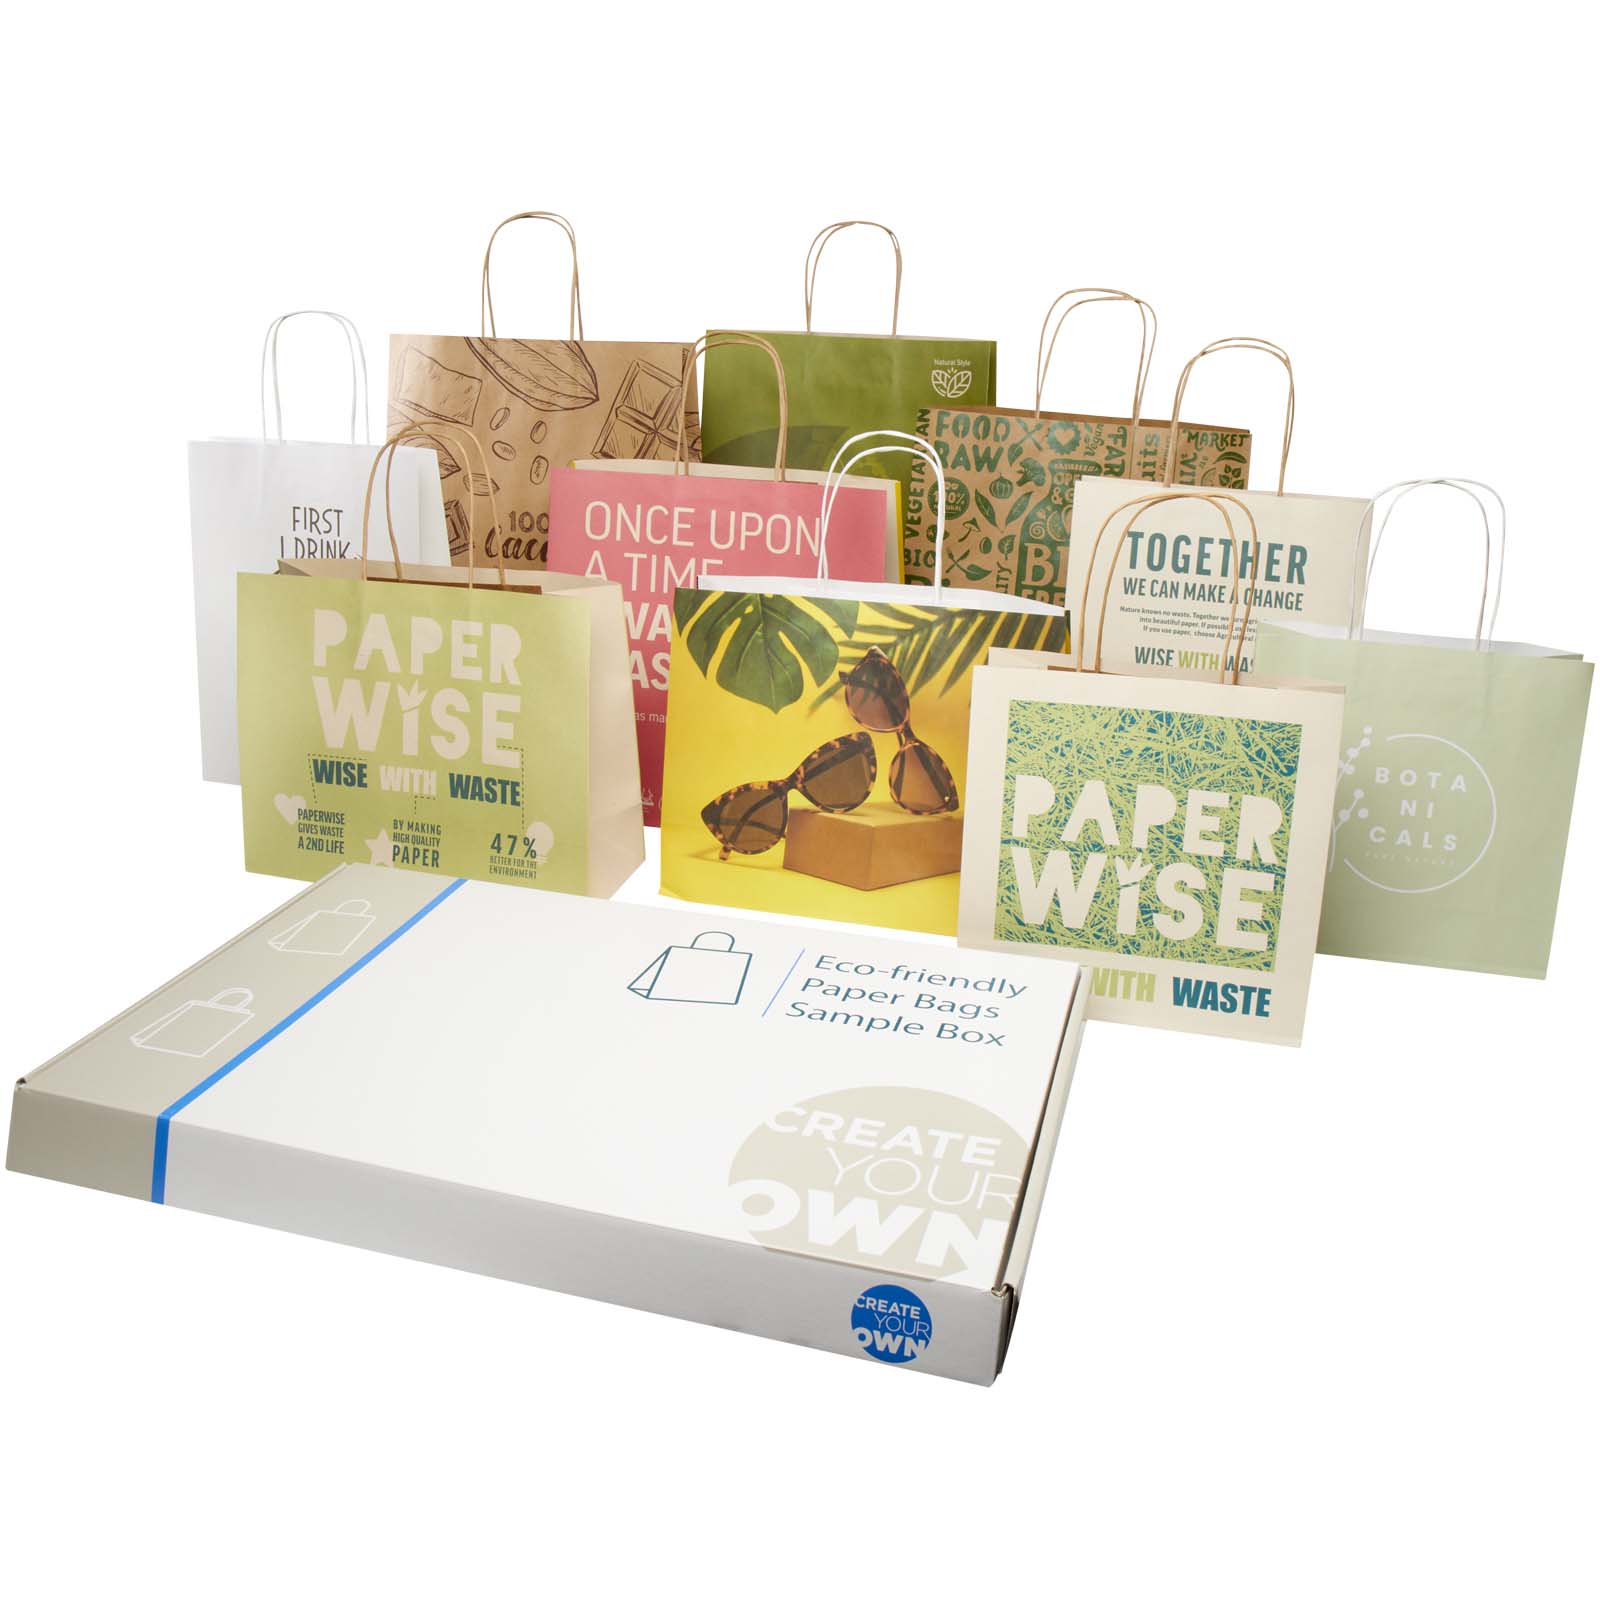 Advertising Paper Bags - Agricultural waste and kraft paper bags sample box